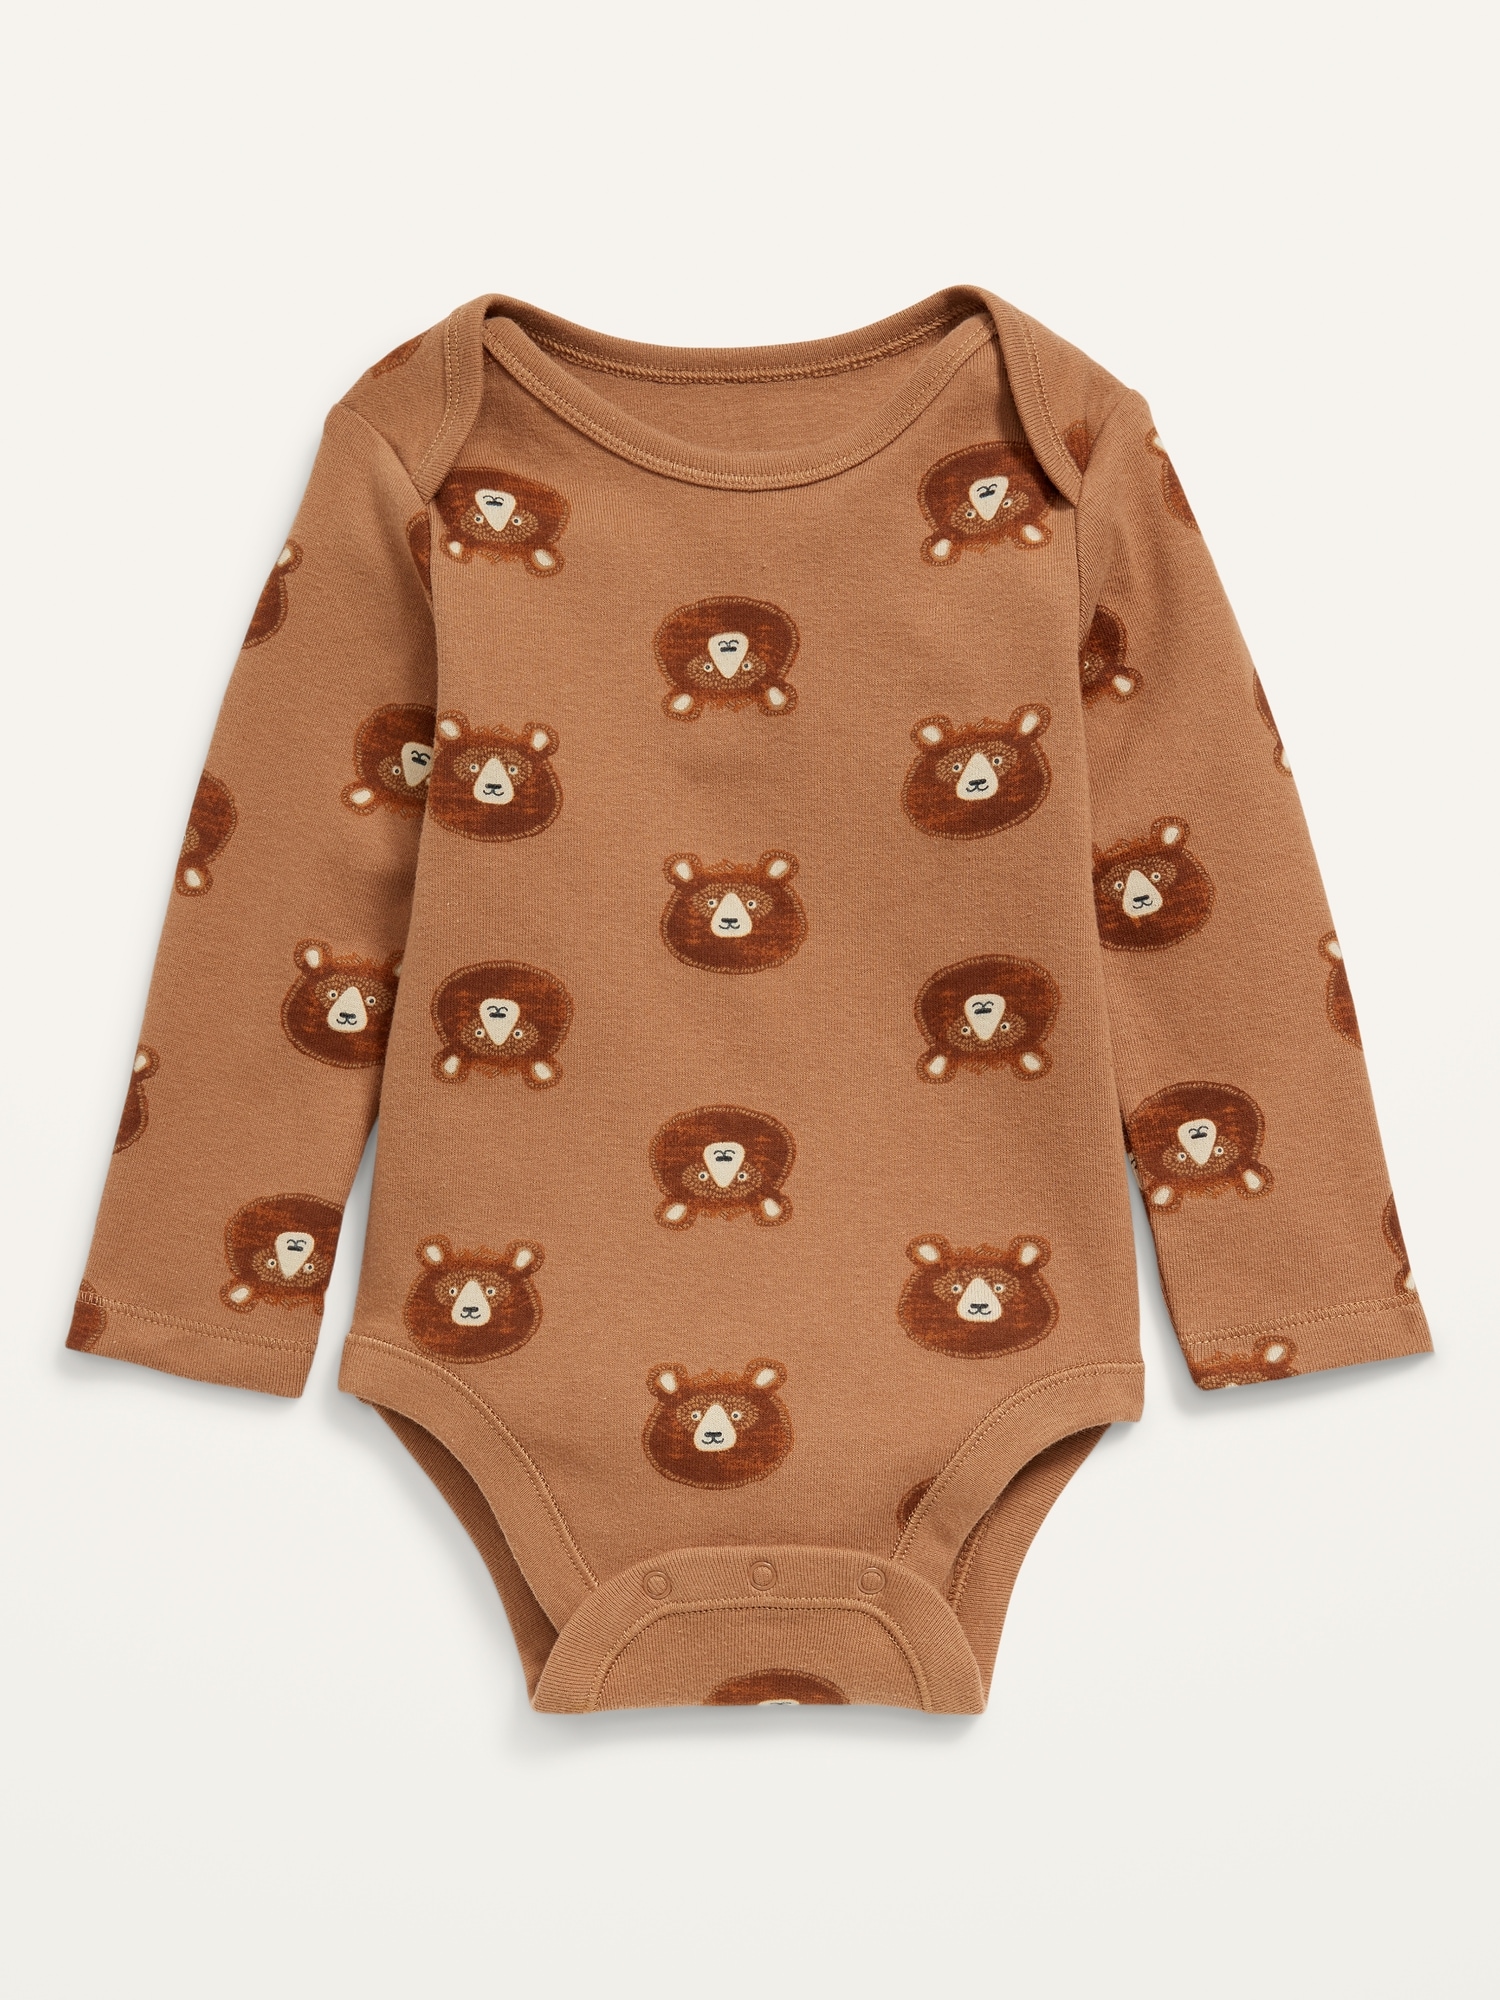 Unisex Printed Long-Sleeve Bodysuit for Baby | Old Navy